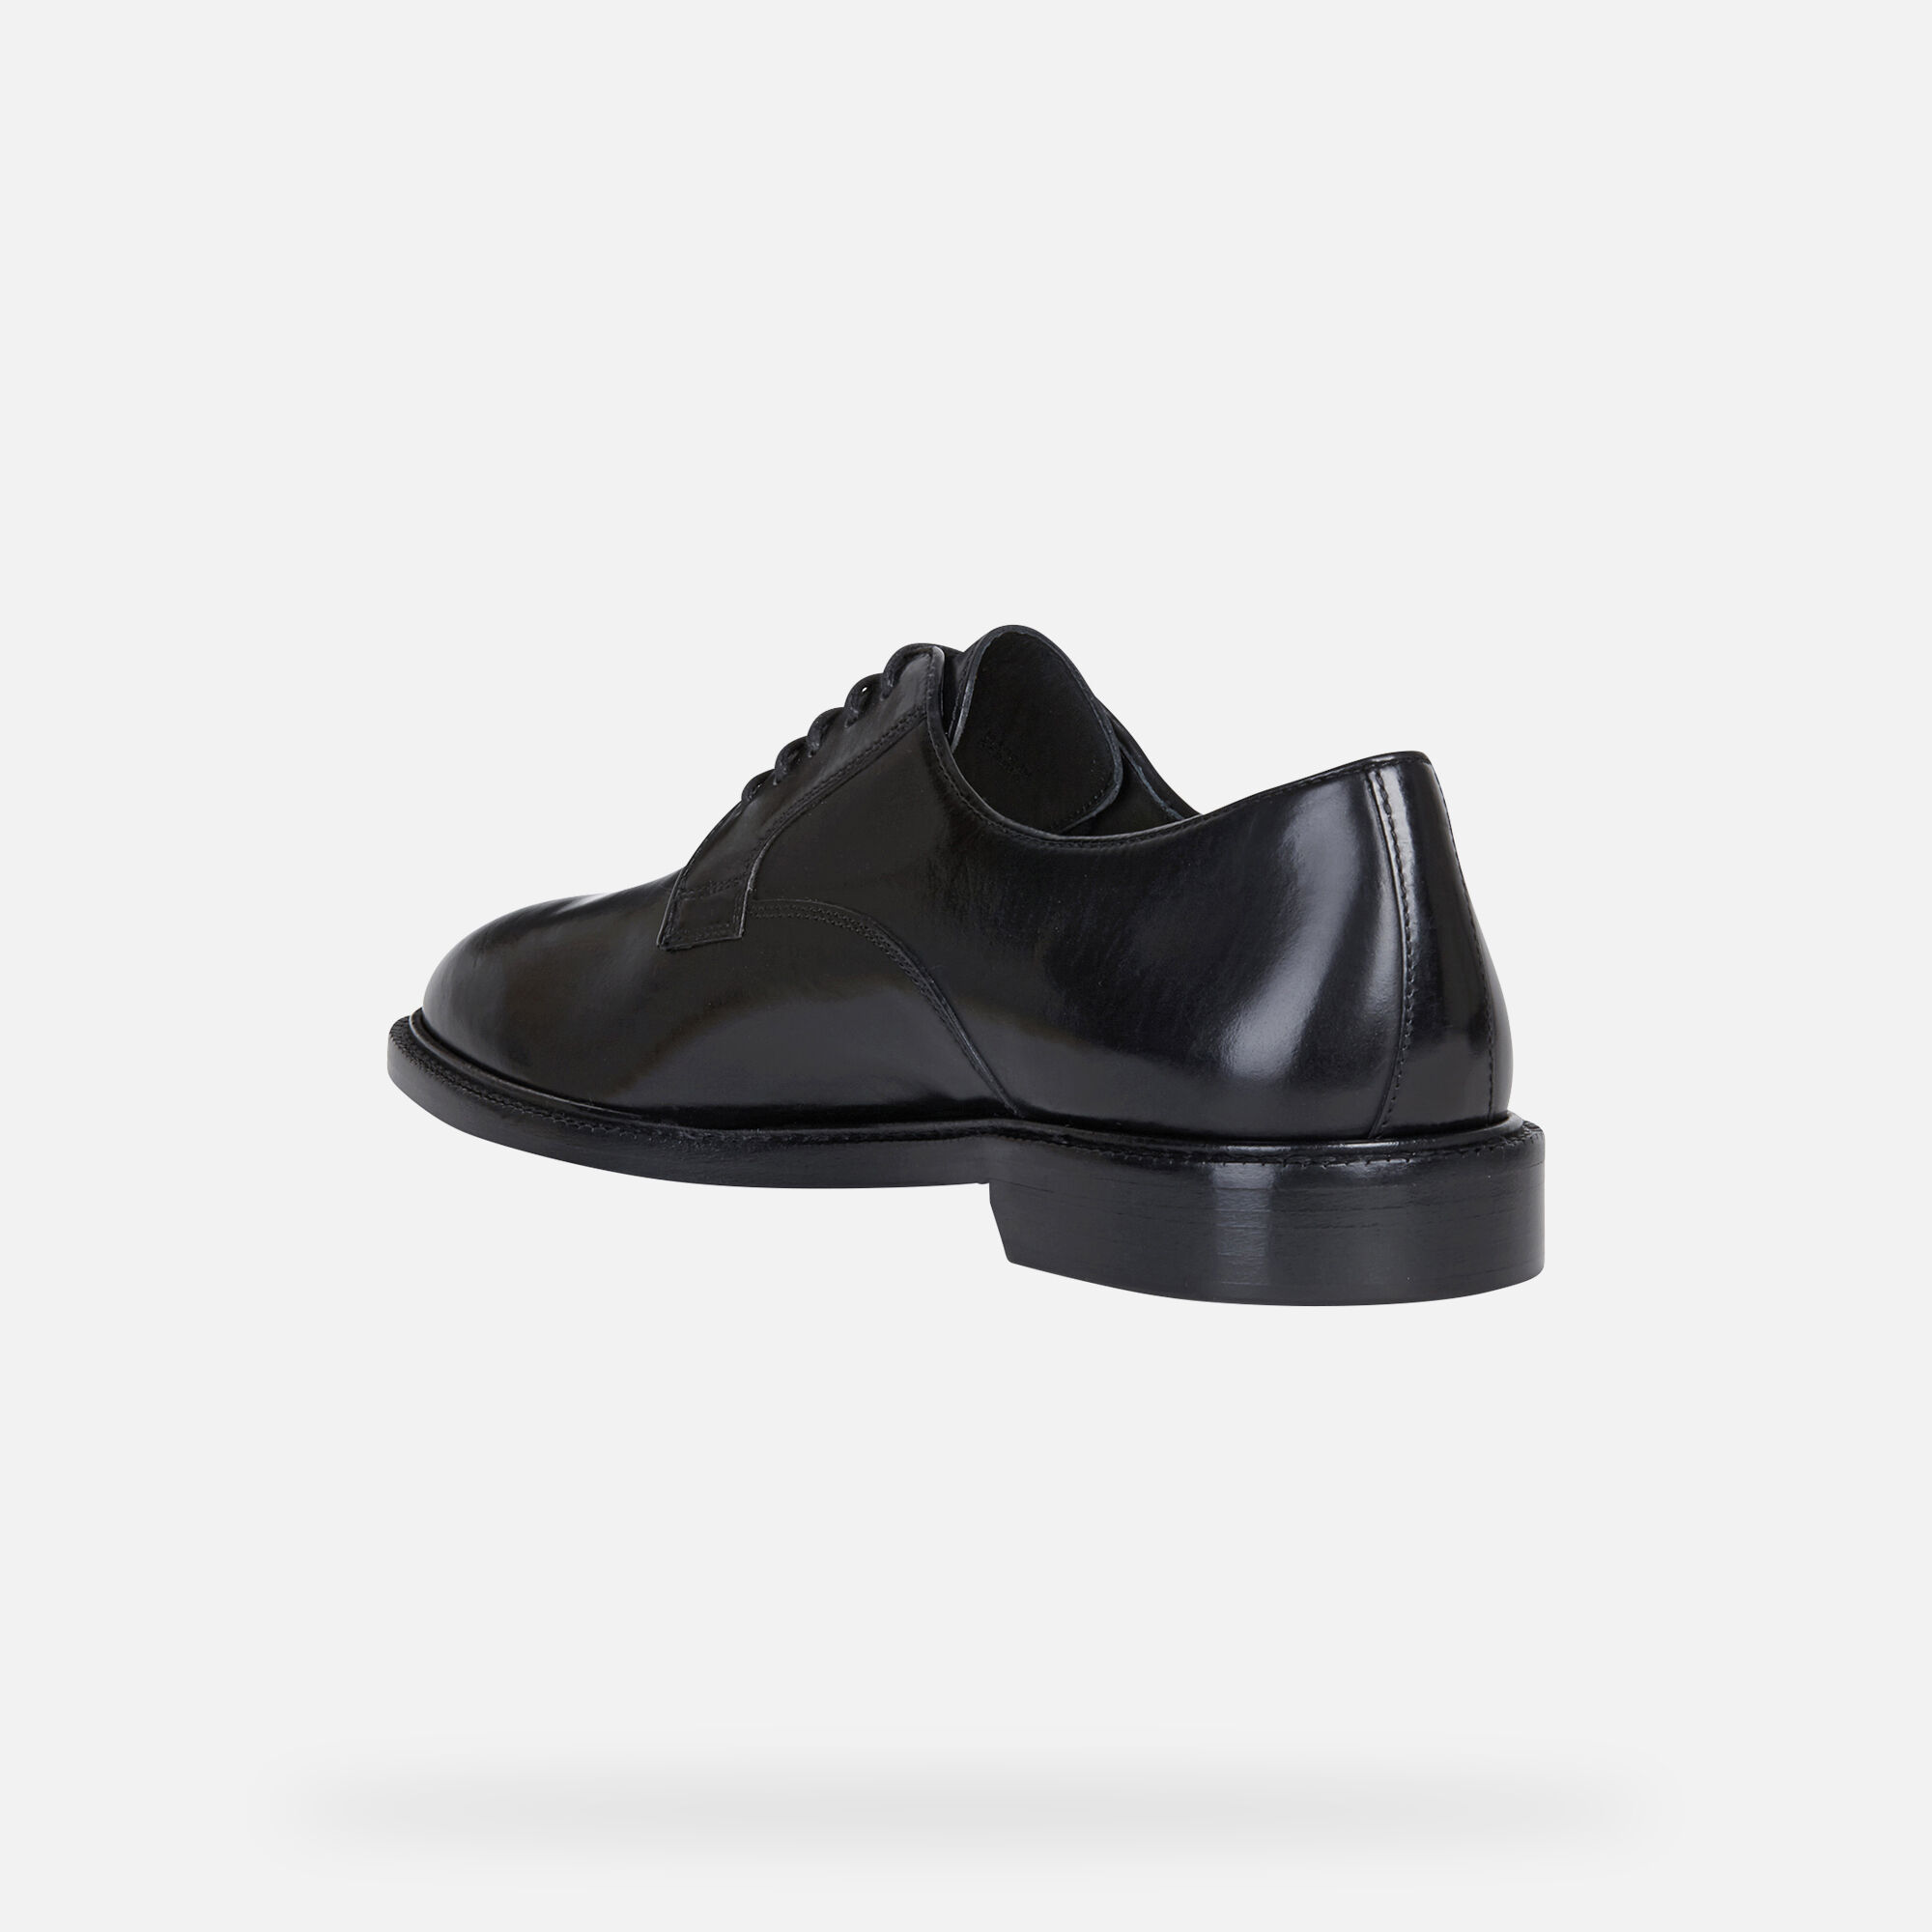 geox cuoio shoes